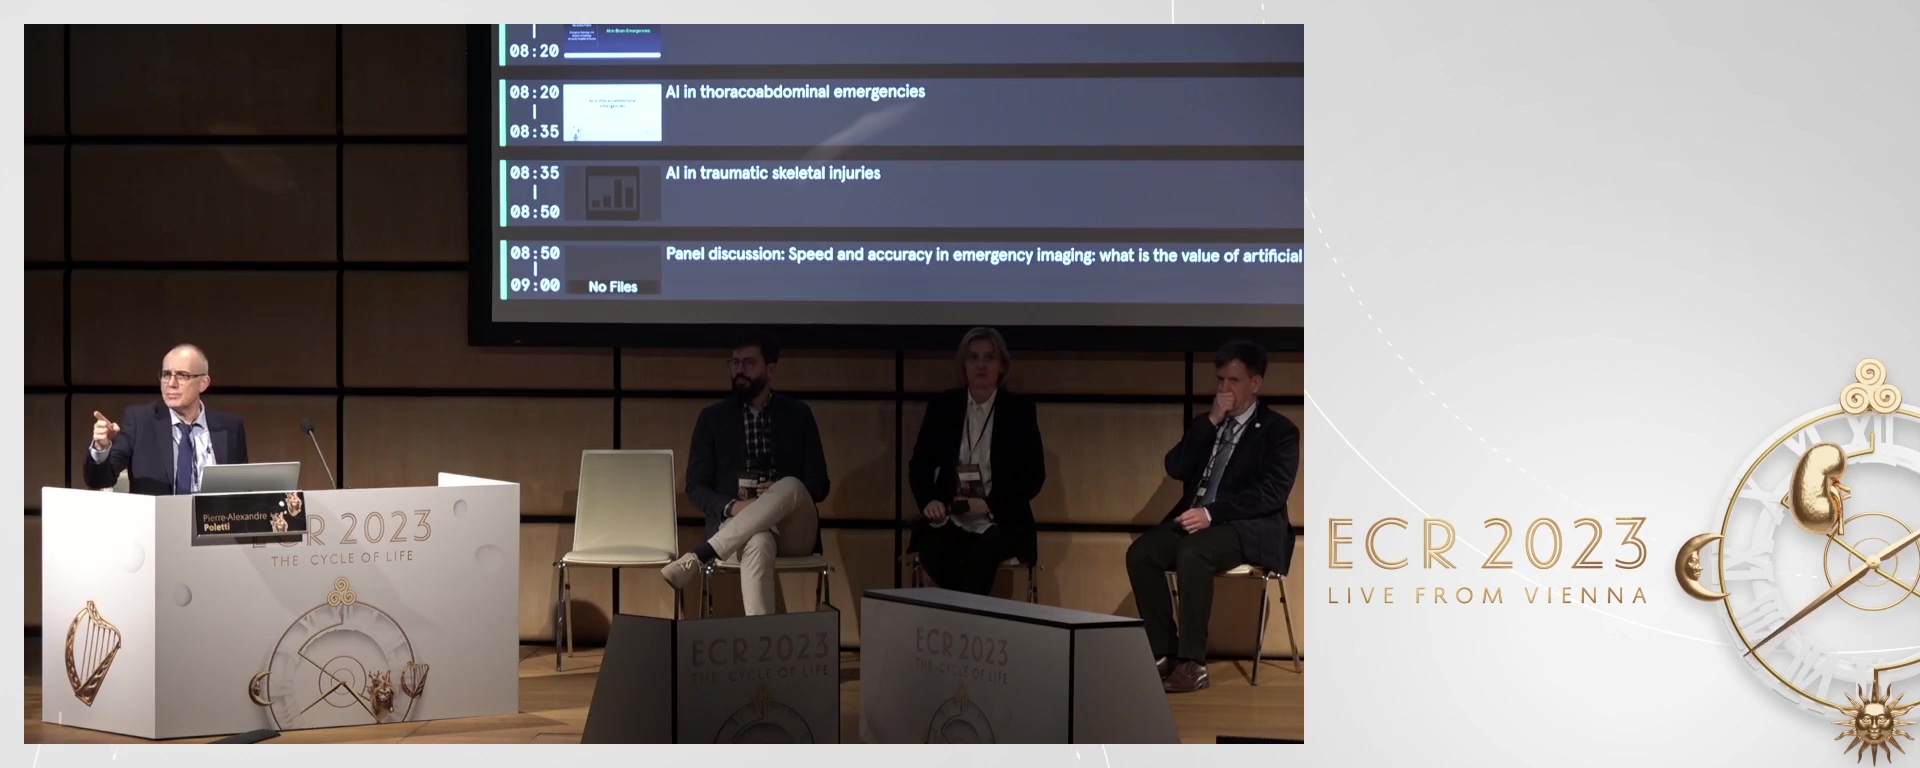 Panel discussion: Speed and accuracy in emergency imaging: what is the value of artificial intelligence?